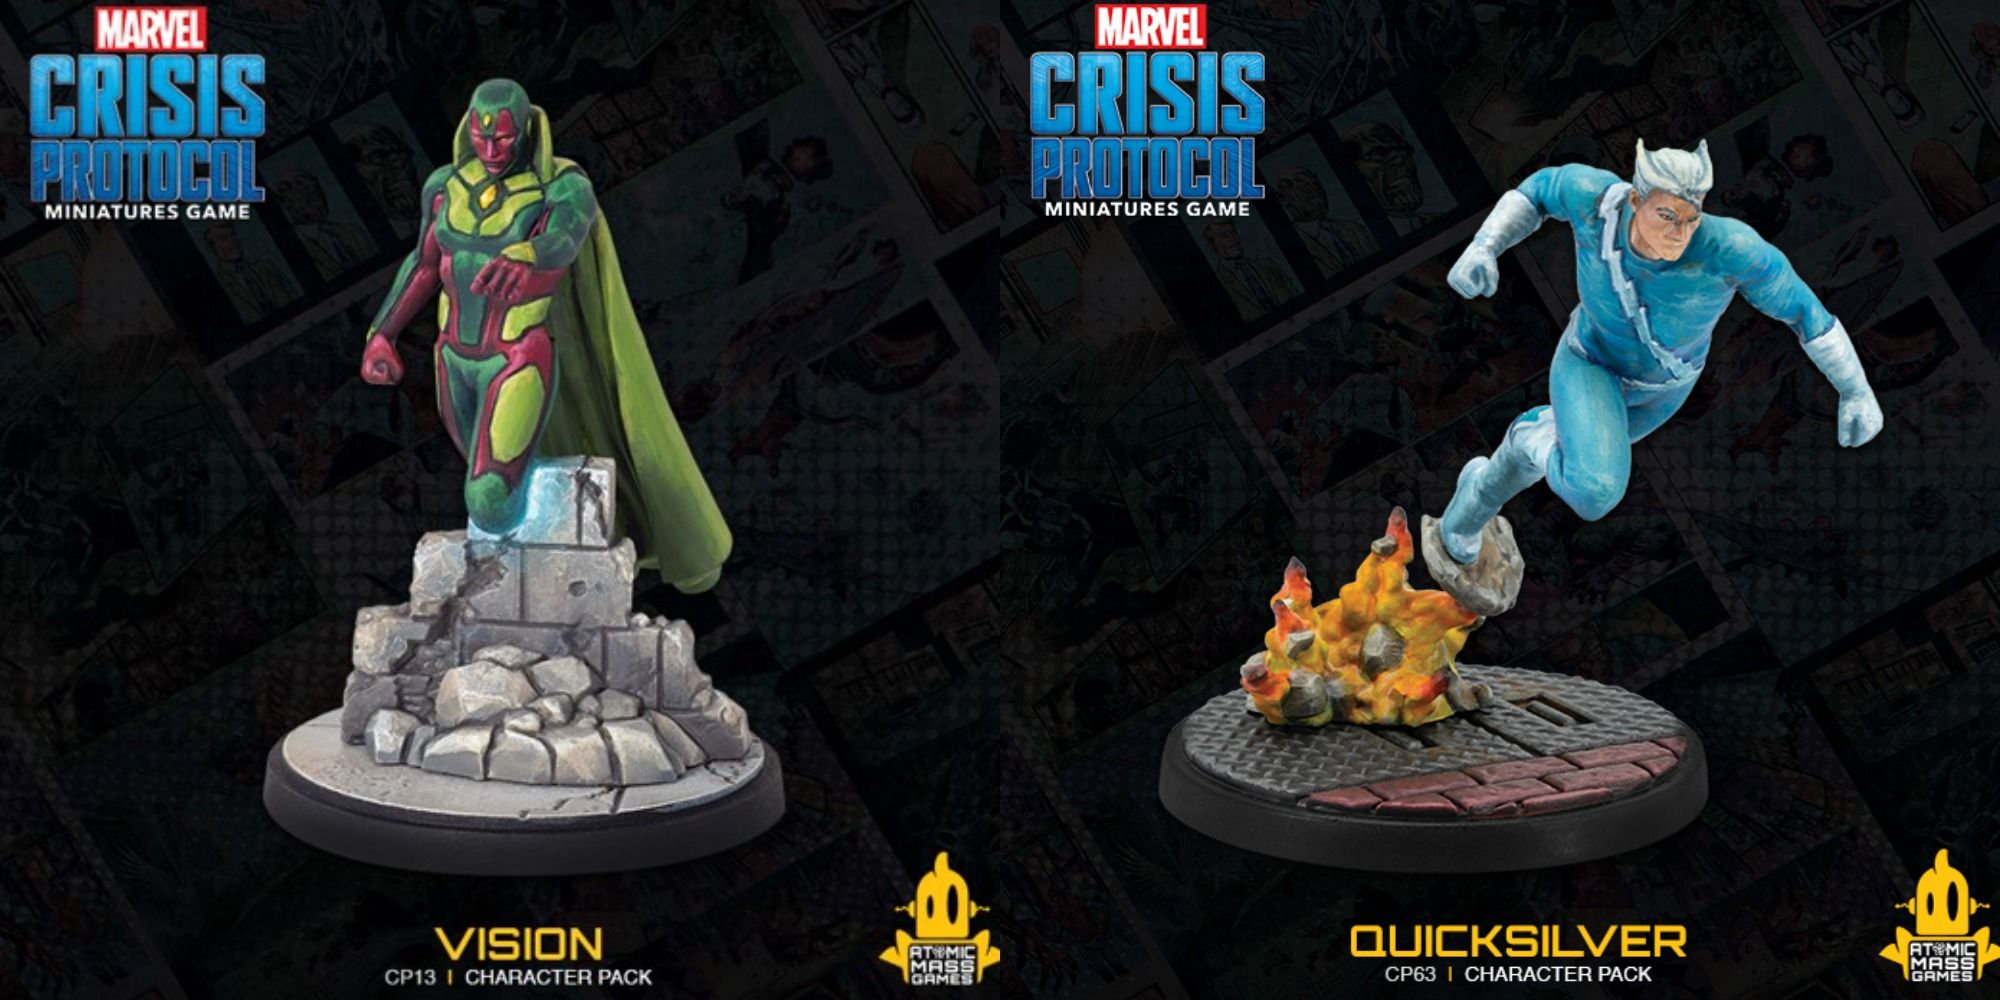 Split image showing figurines for Vision and Quicksilver in Marvel Crisis Protocol.